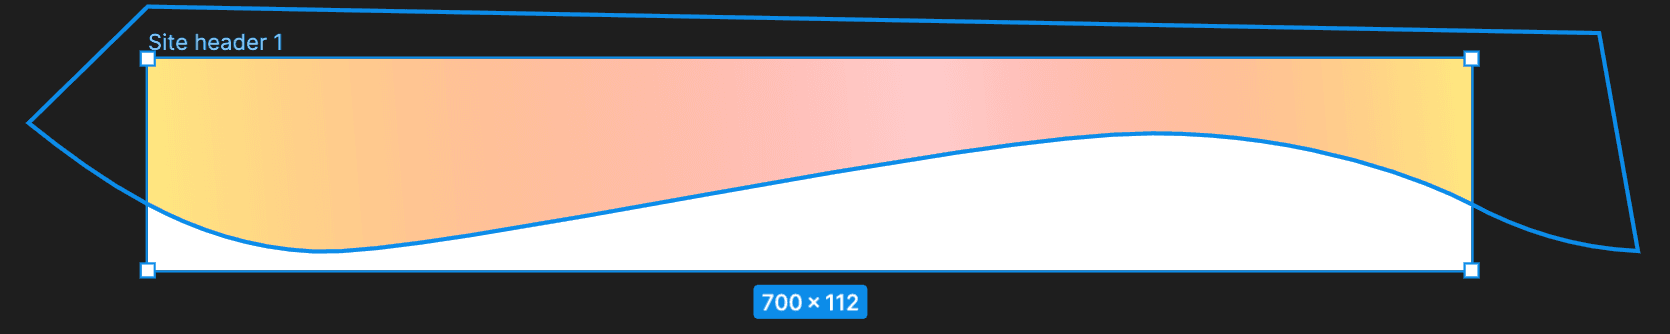 A Figma screenshot showing a 700x112 frame with a wavy path with a translucent gradient fill inside it.